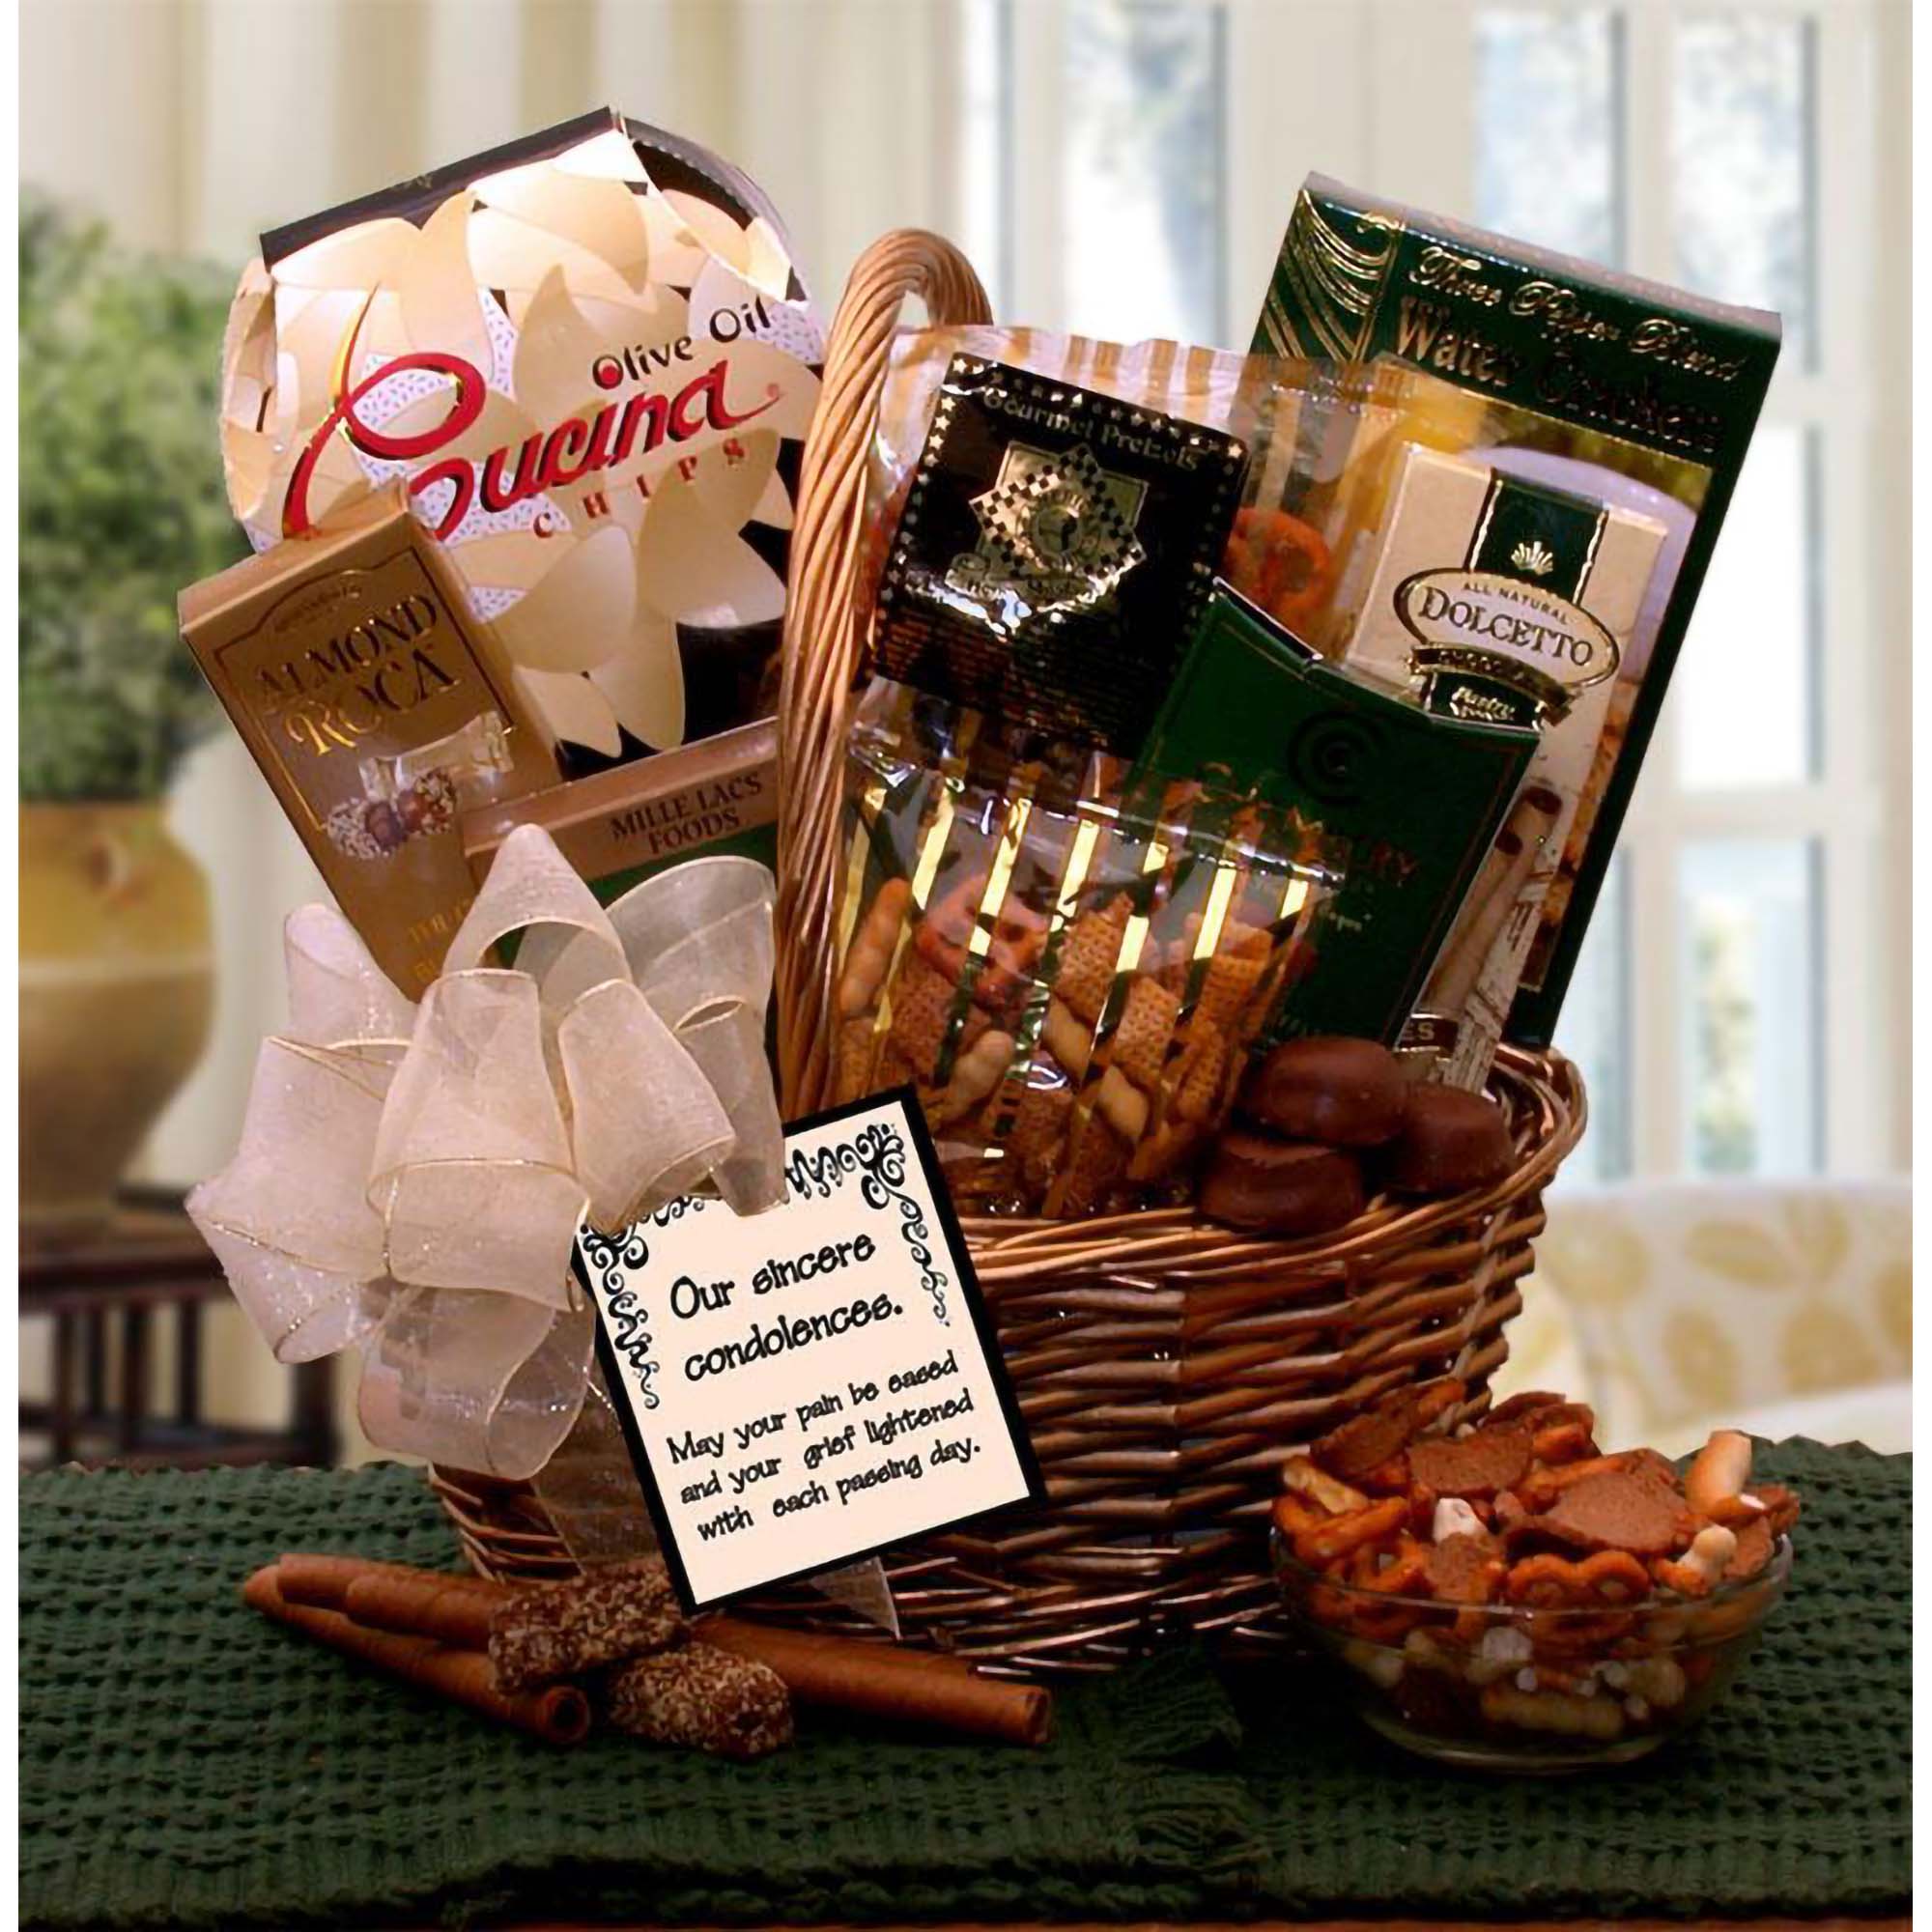 Gift Basket With Our Sincere Condolences Gift Basket